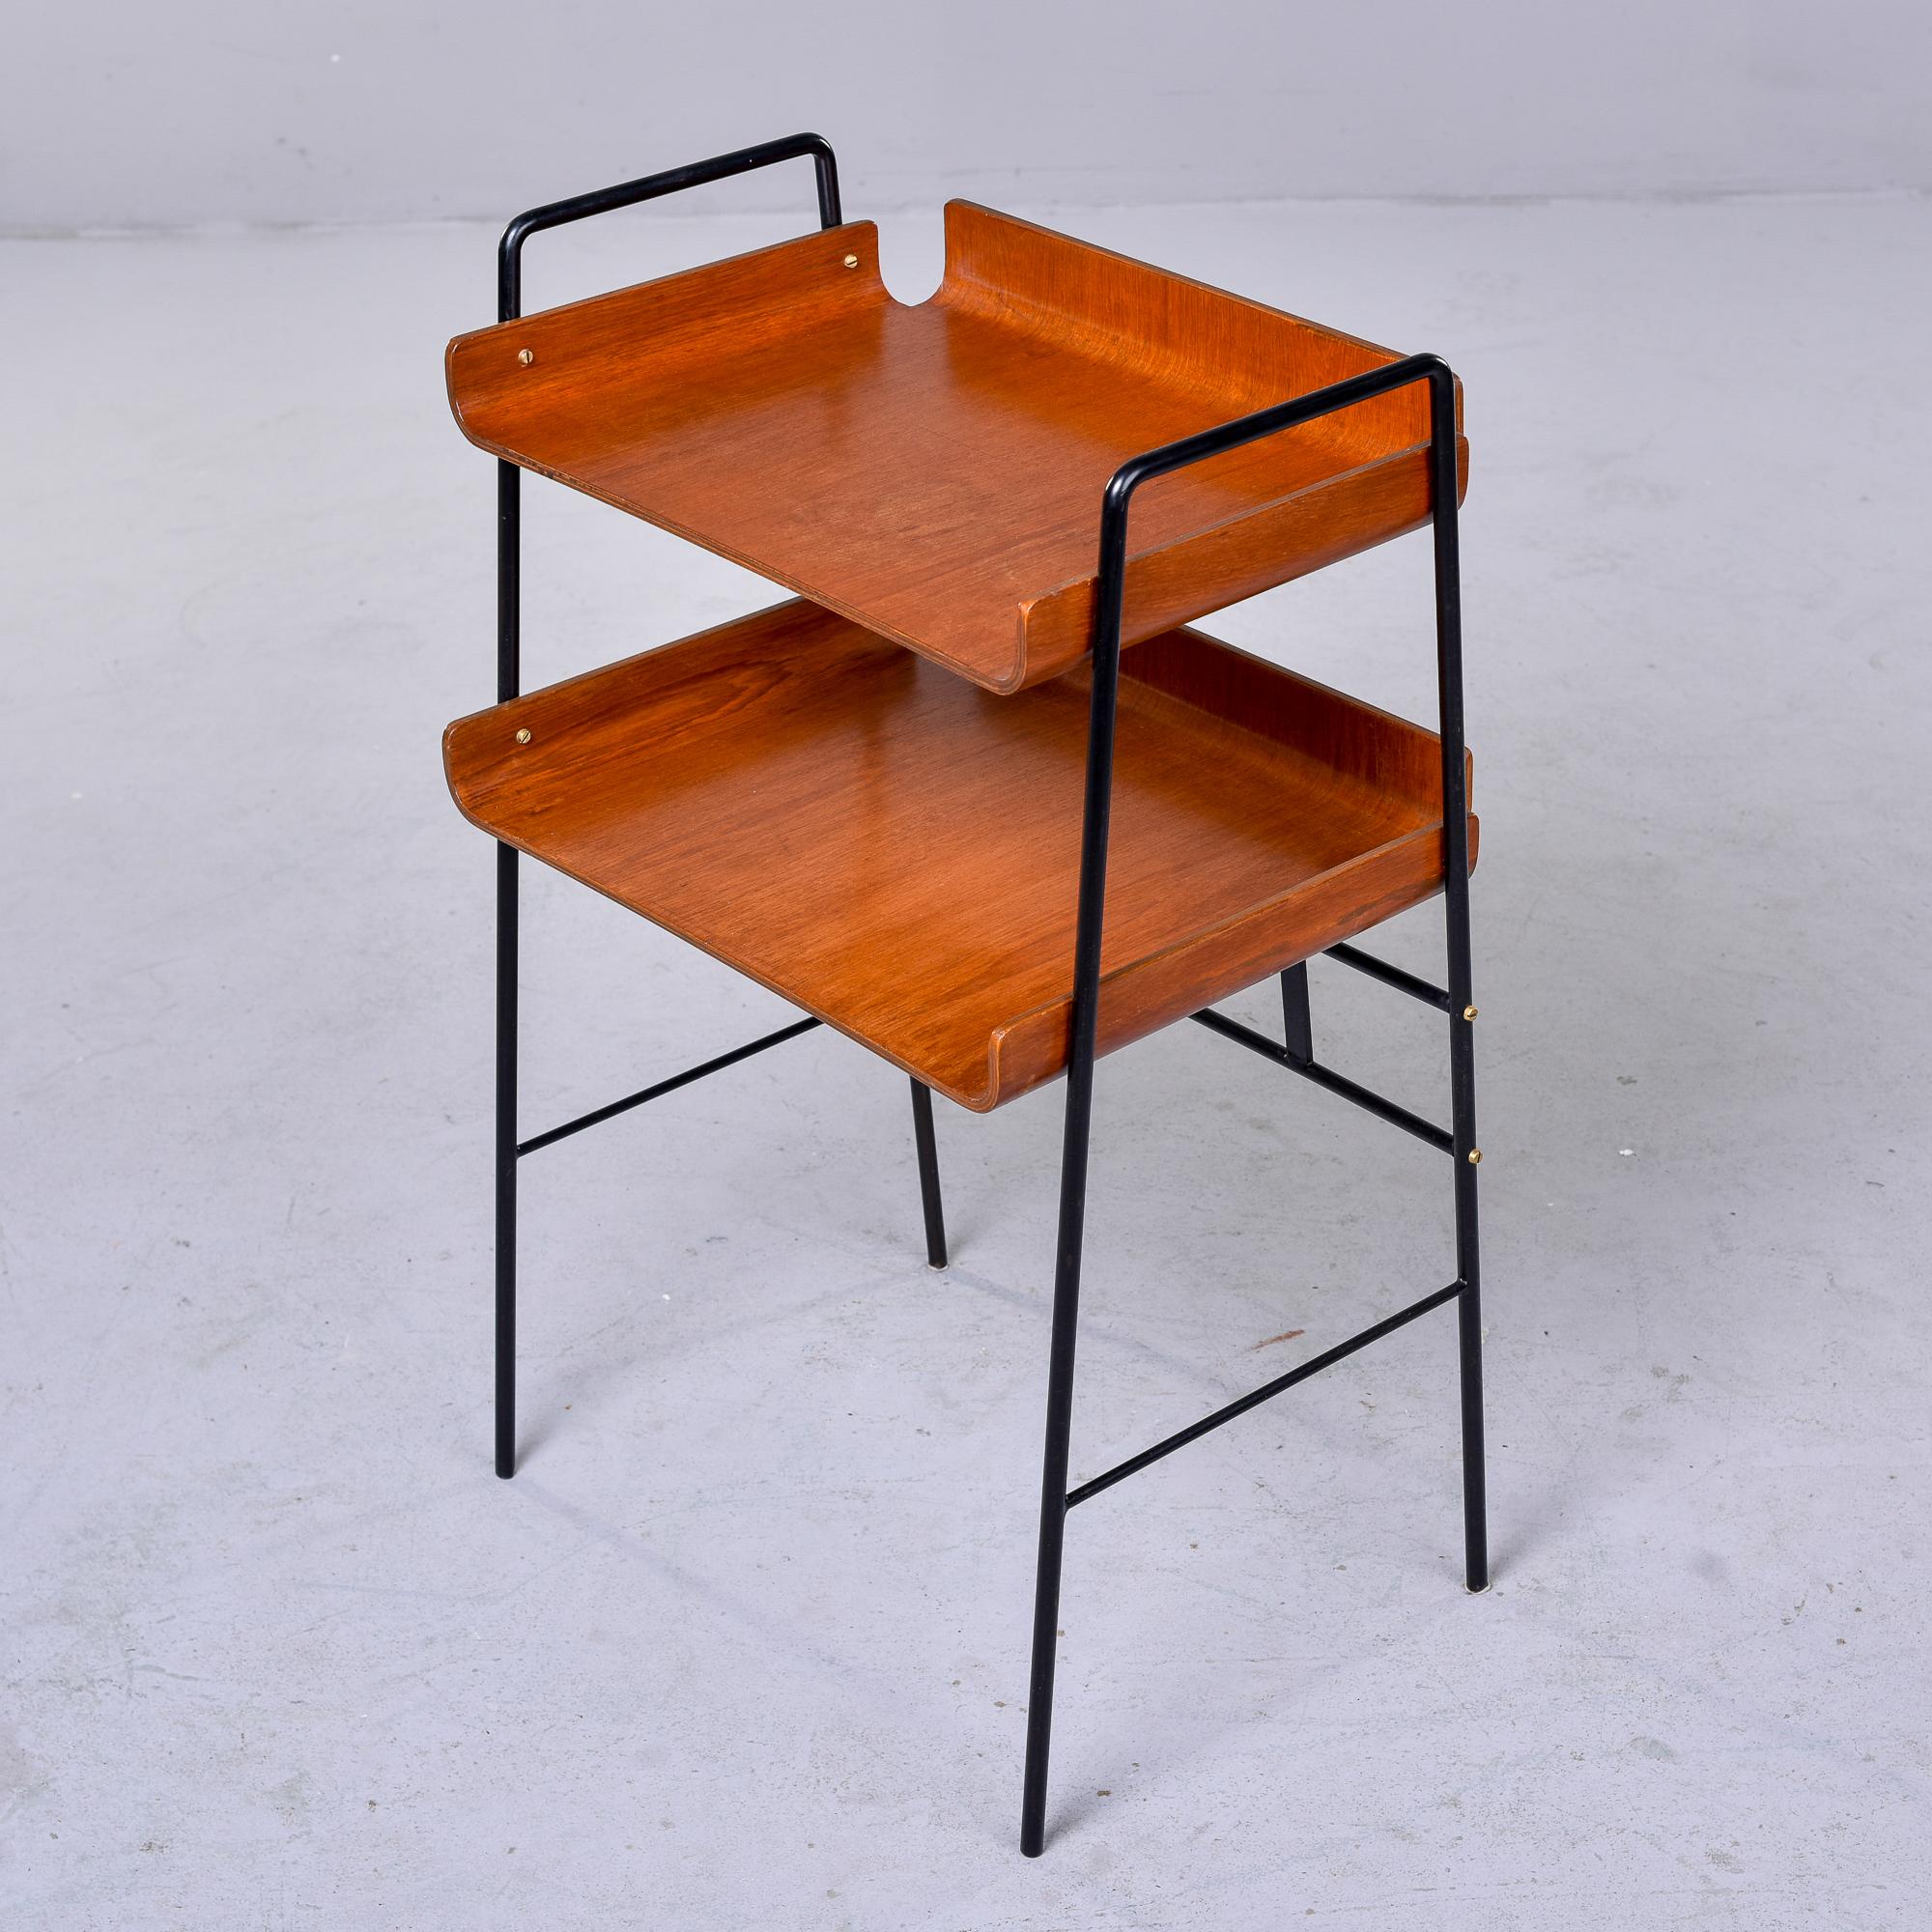 20th Century Italian Mid-Century Two Tier Bentwood Table with Slender Black Iron Frame For Sale